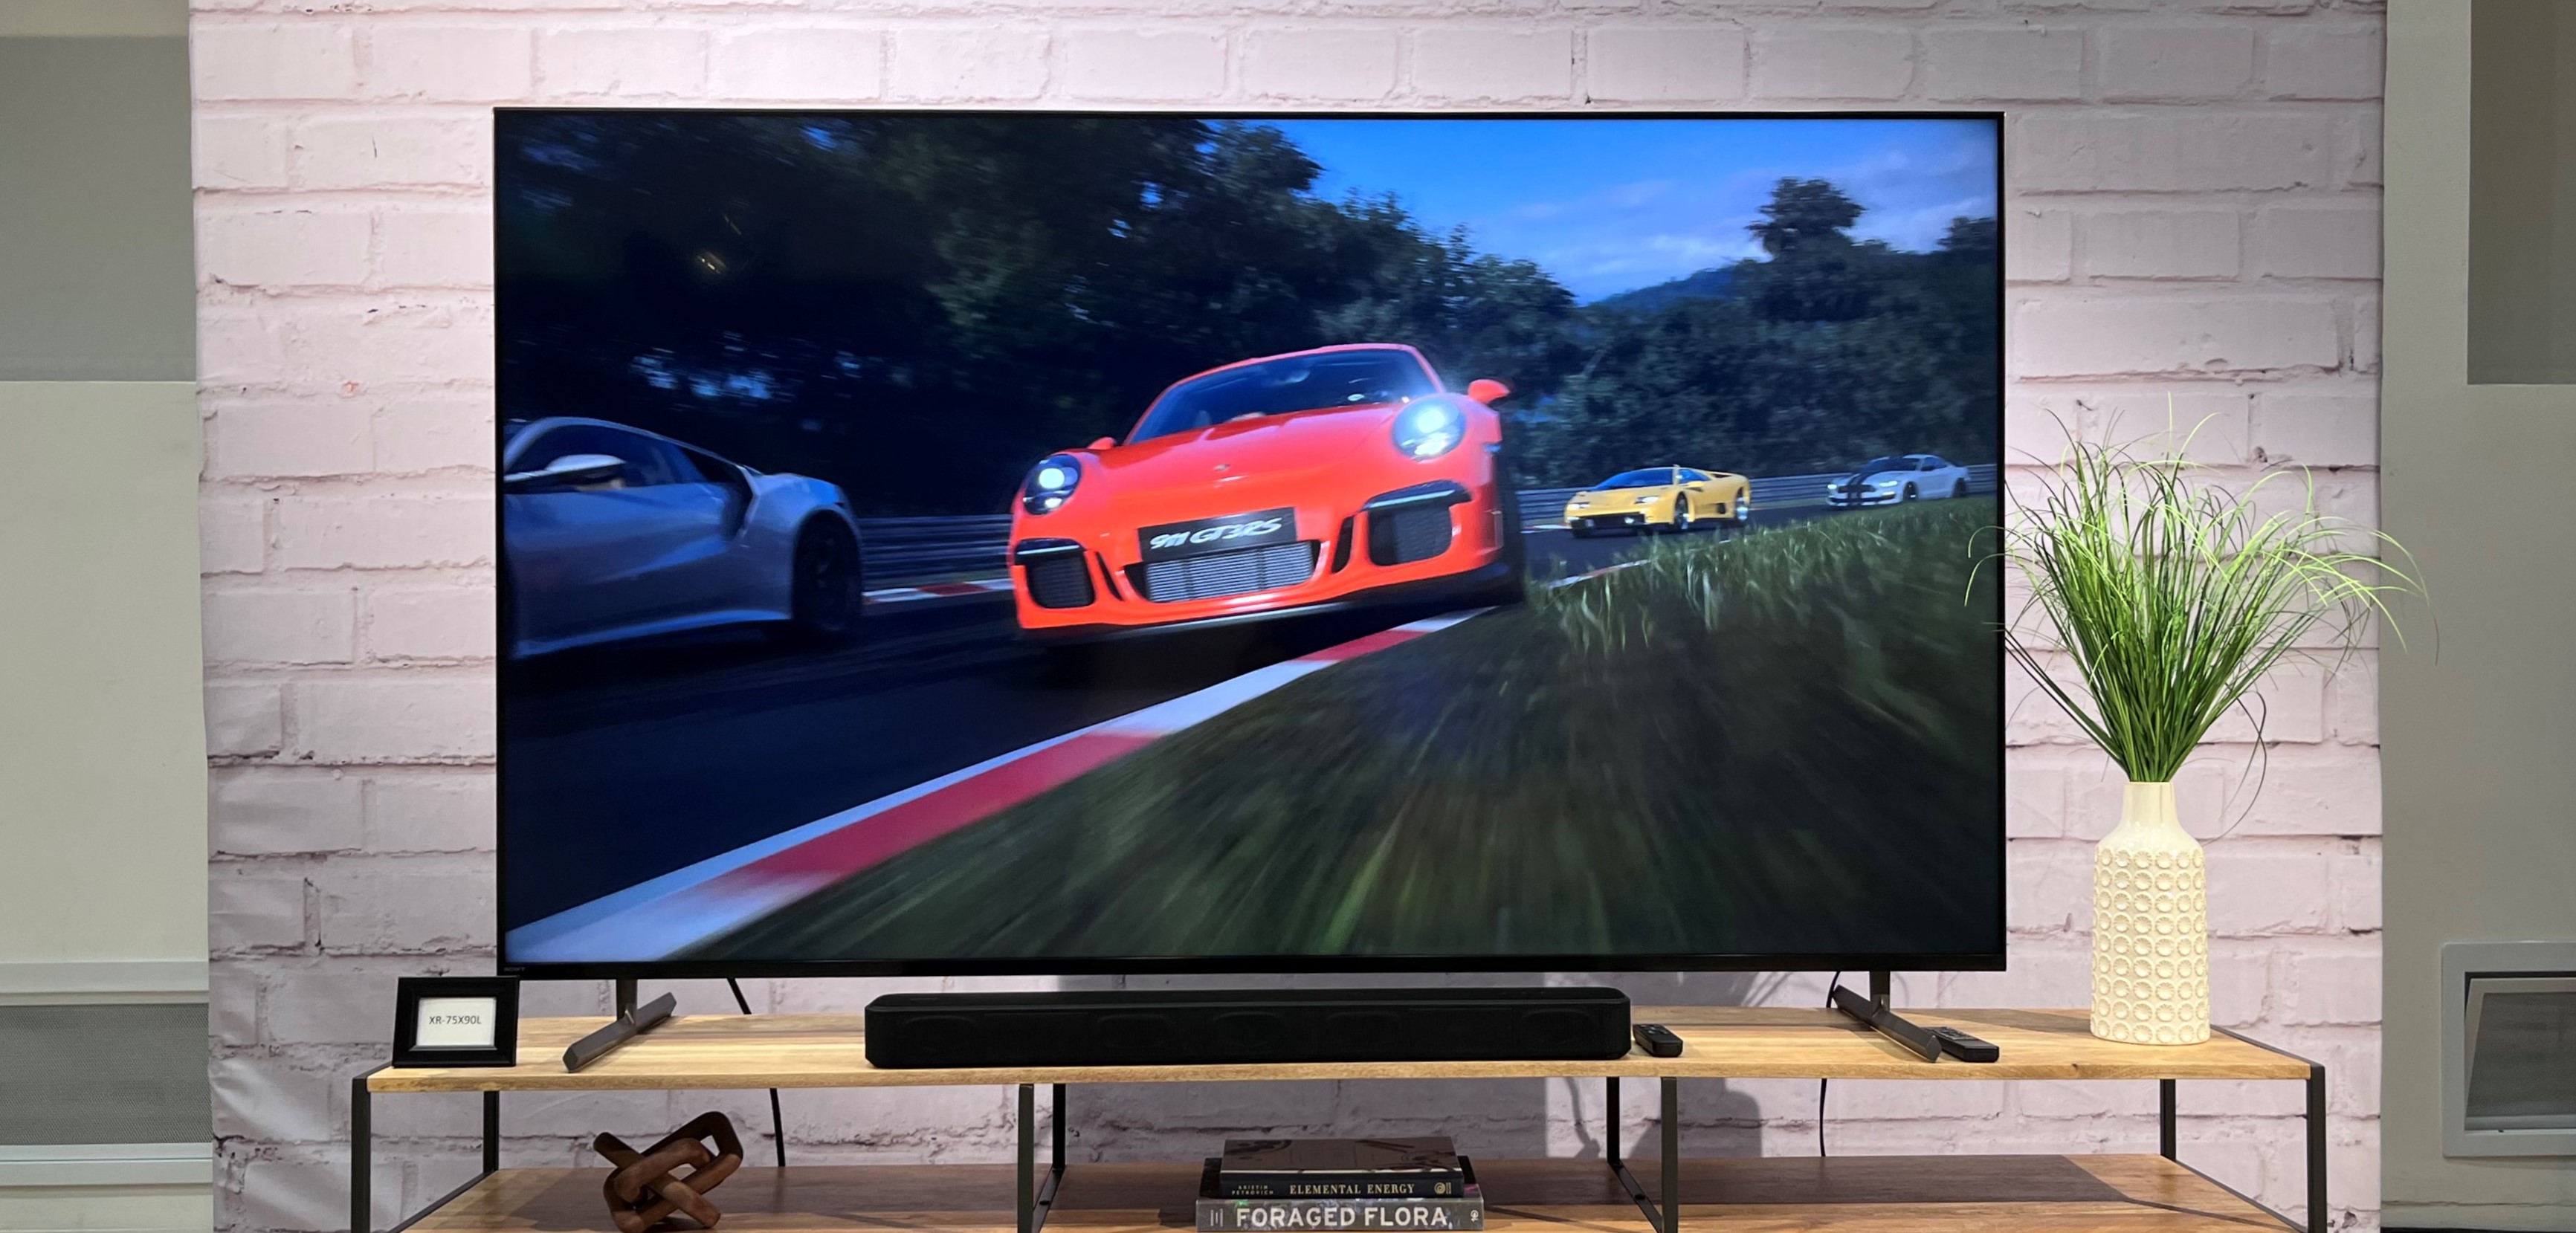 Sony BRAVIA's Full Array LED TVs with local dimming give you more realistic  peaks of brightness, more accurate shadow detail and deeper, inkier blacks.